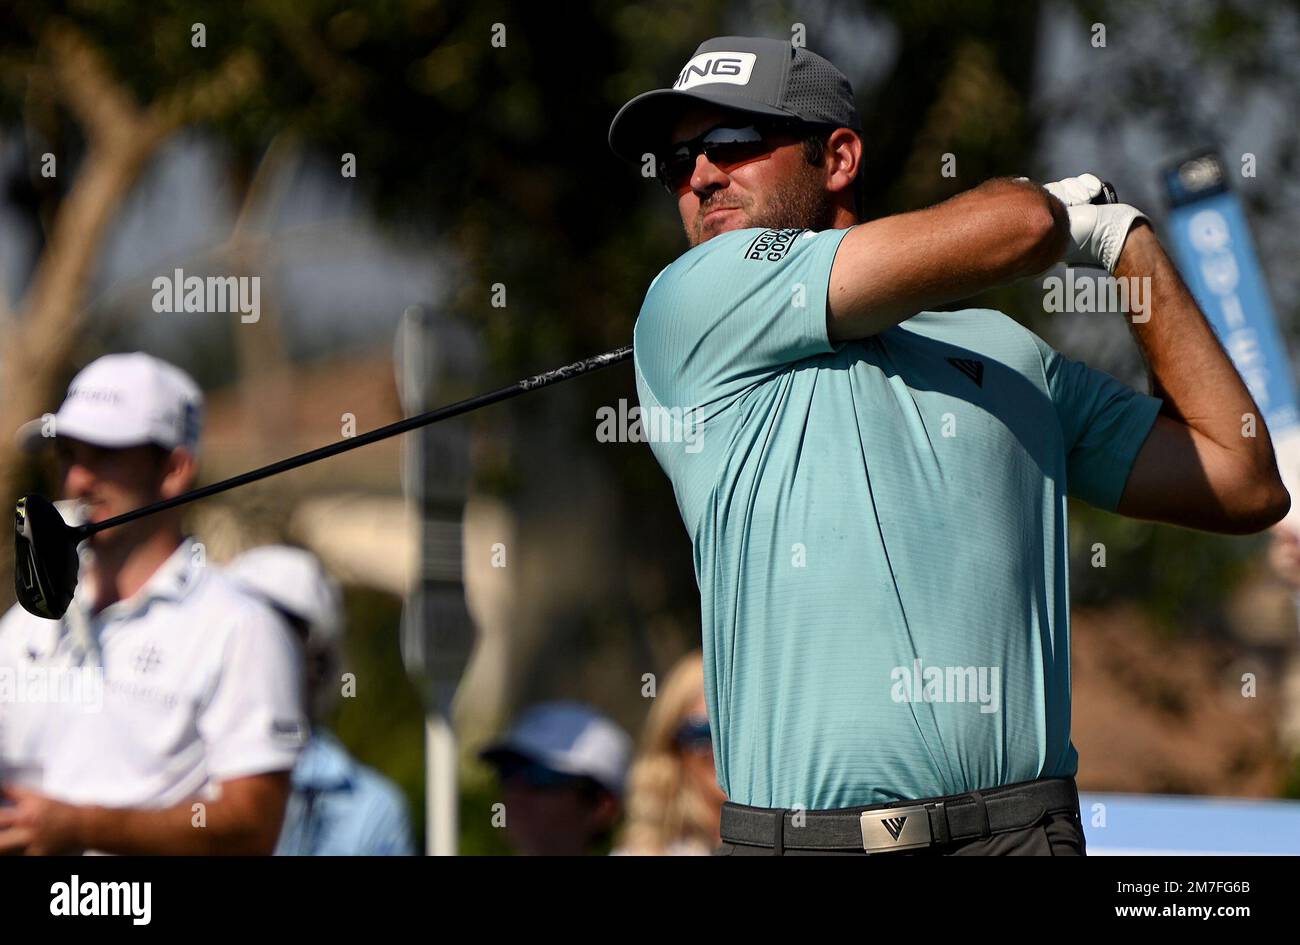 Denny McCarthy tees off on the ninth hole during the final round of the PGA QBE Shootout golf tournament at Tiburon Golf Club, Sunday, Dec